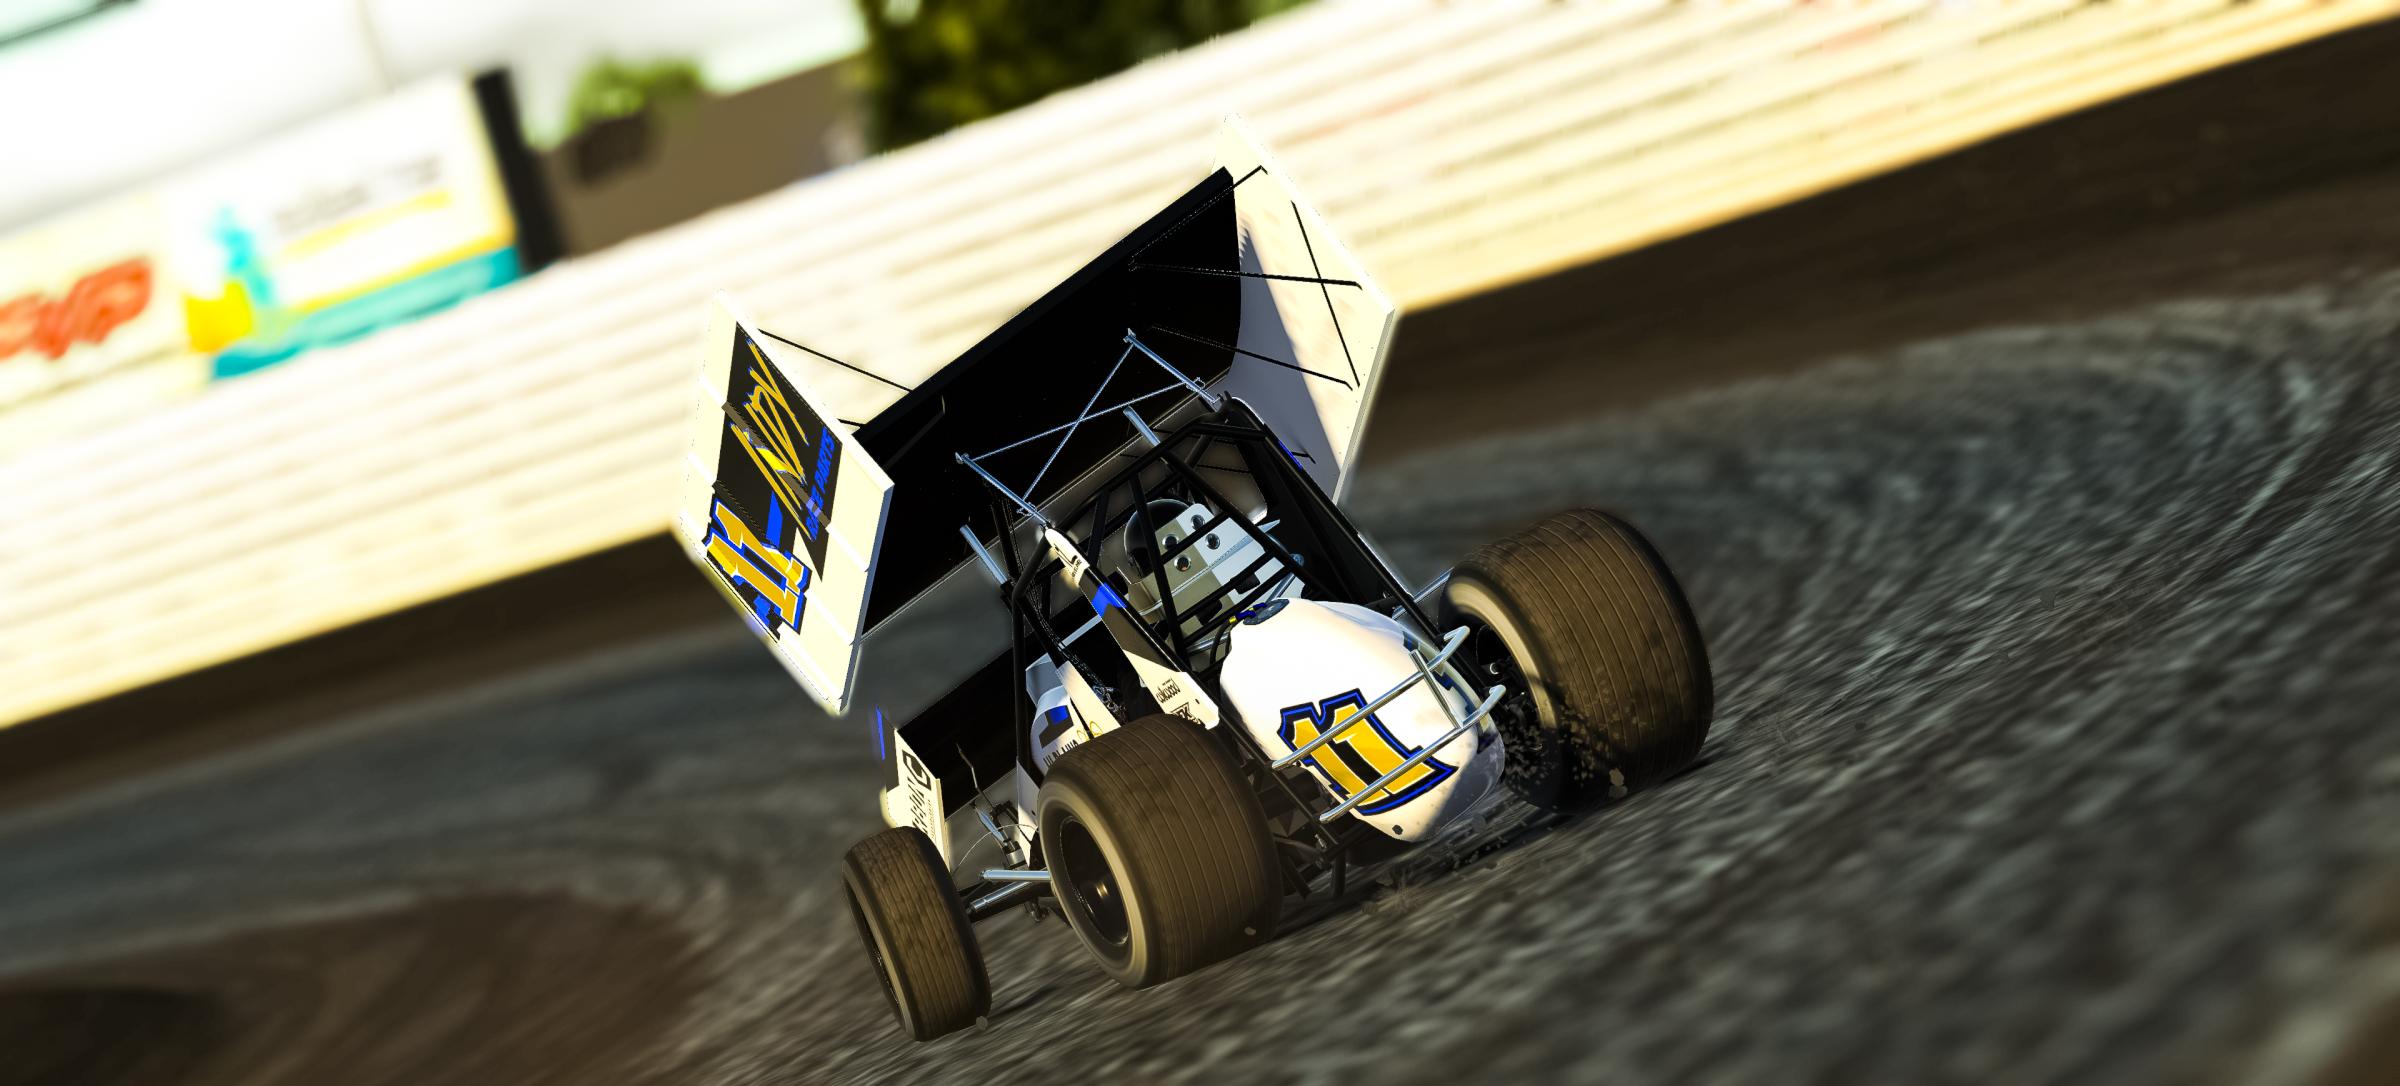 Preview of 2022 Buddy Kofoid Knoxville Nationals Sprint Car by Koleton Anderson